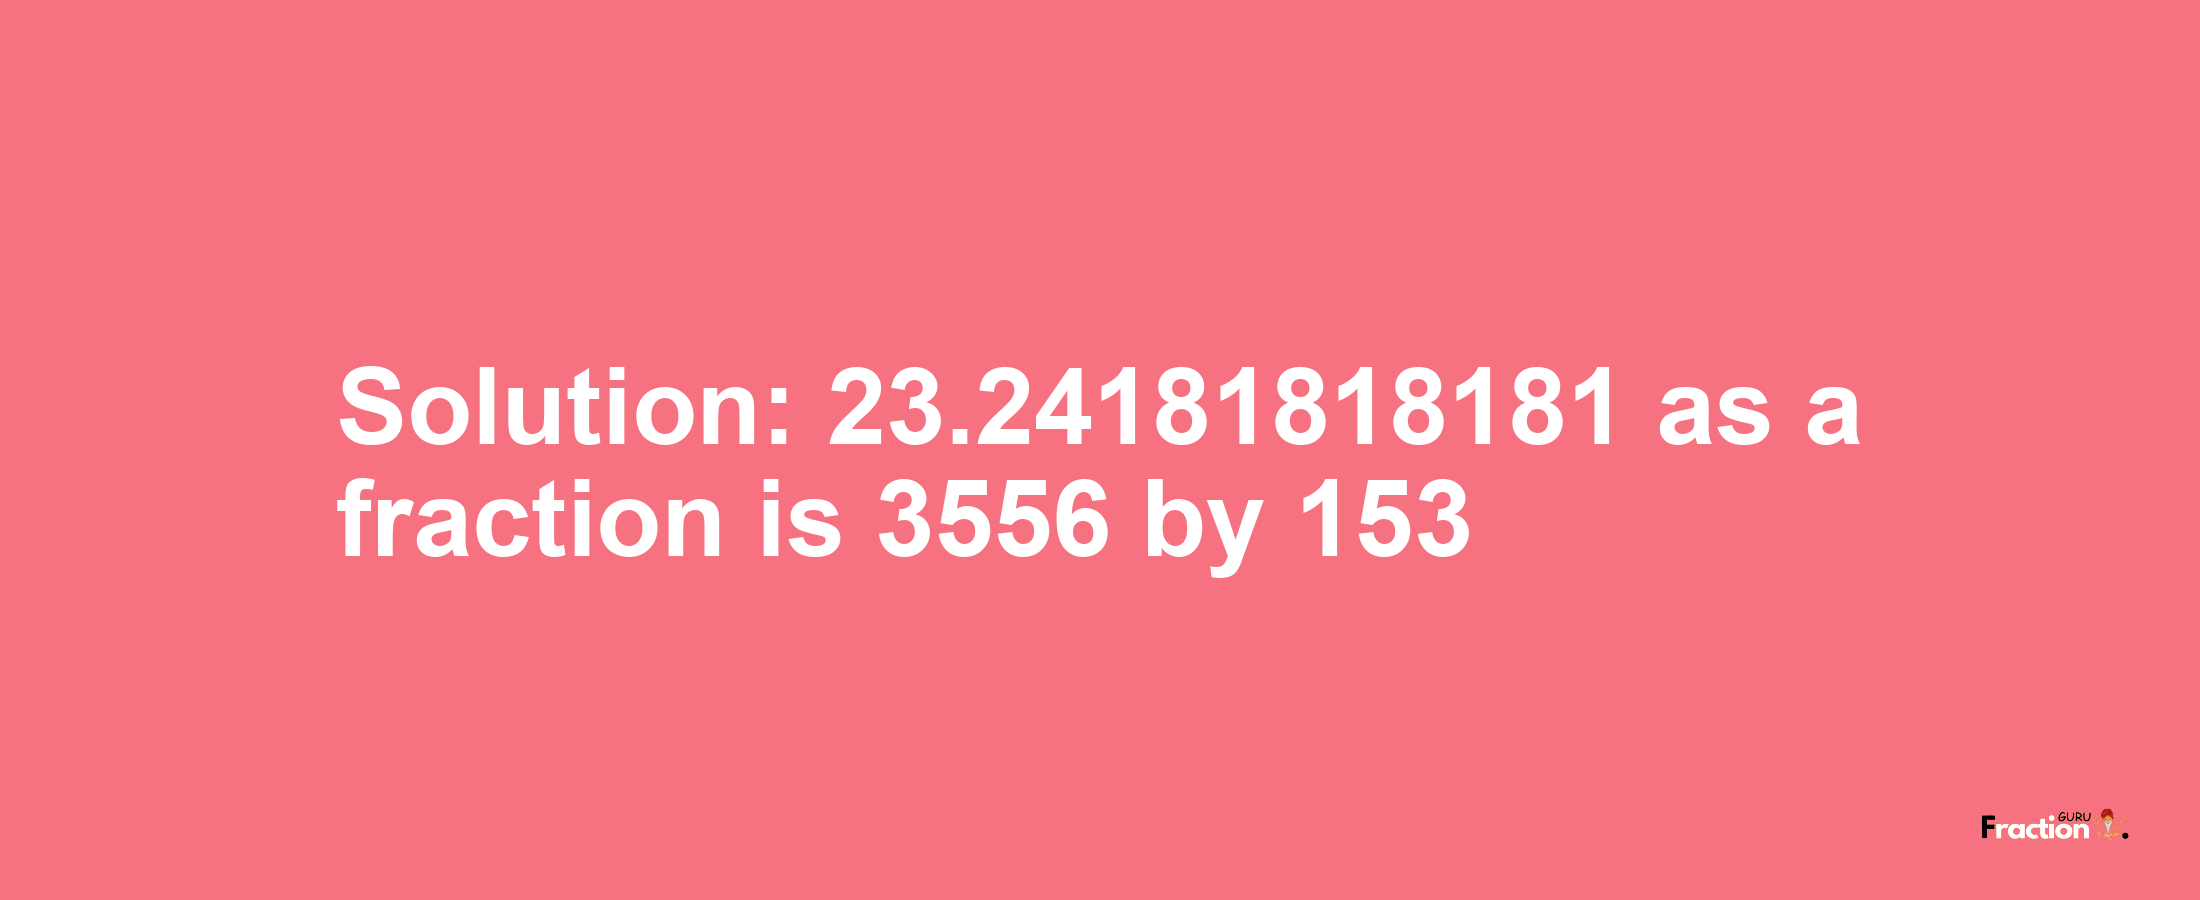 Solution:23.24181818181 as a fraction is 3556/153